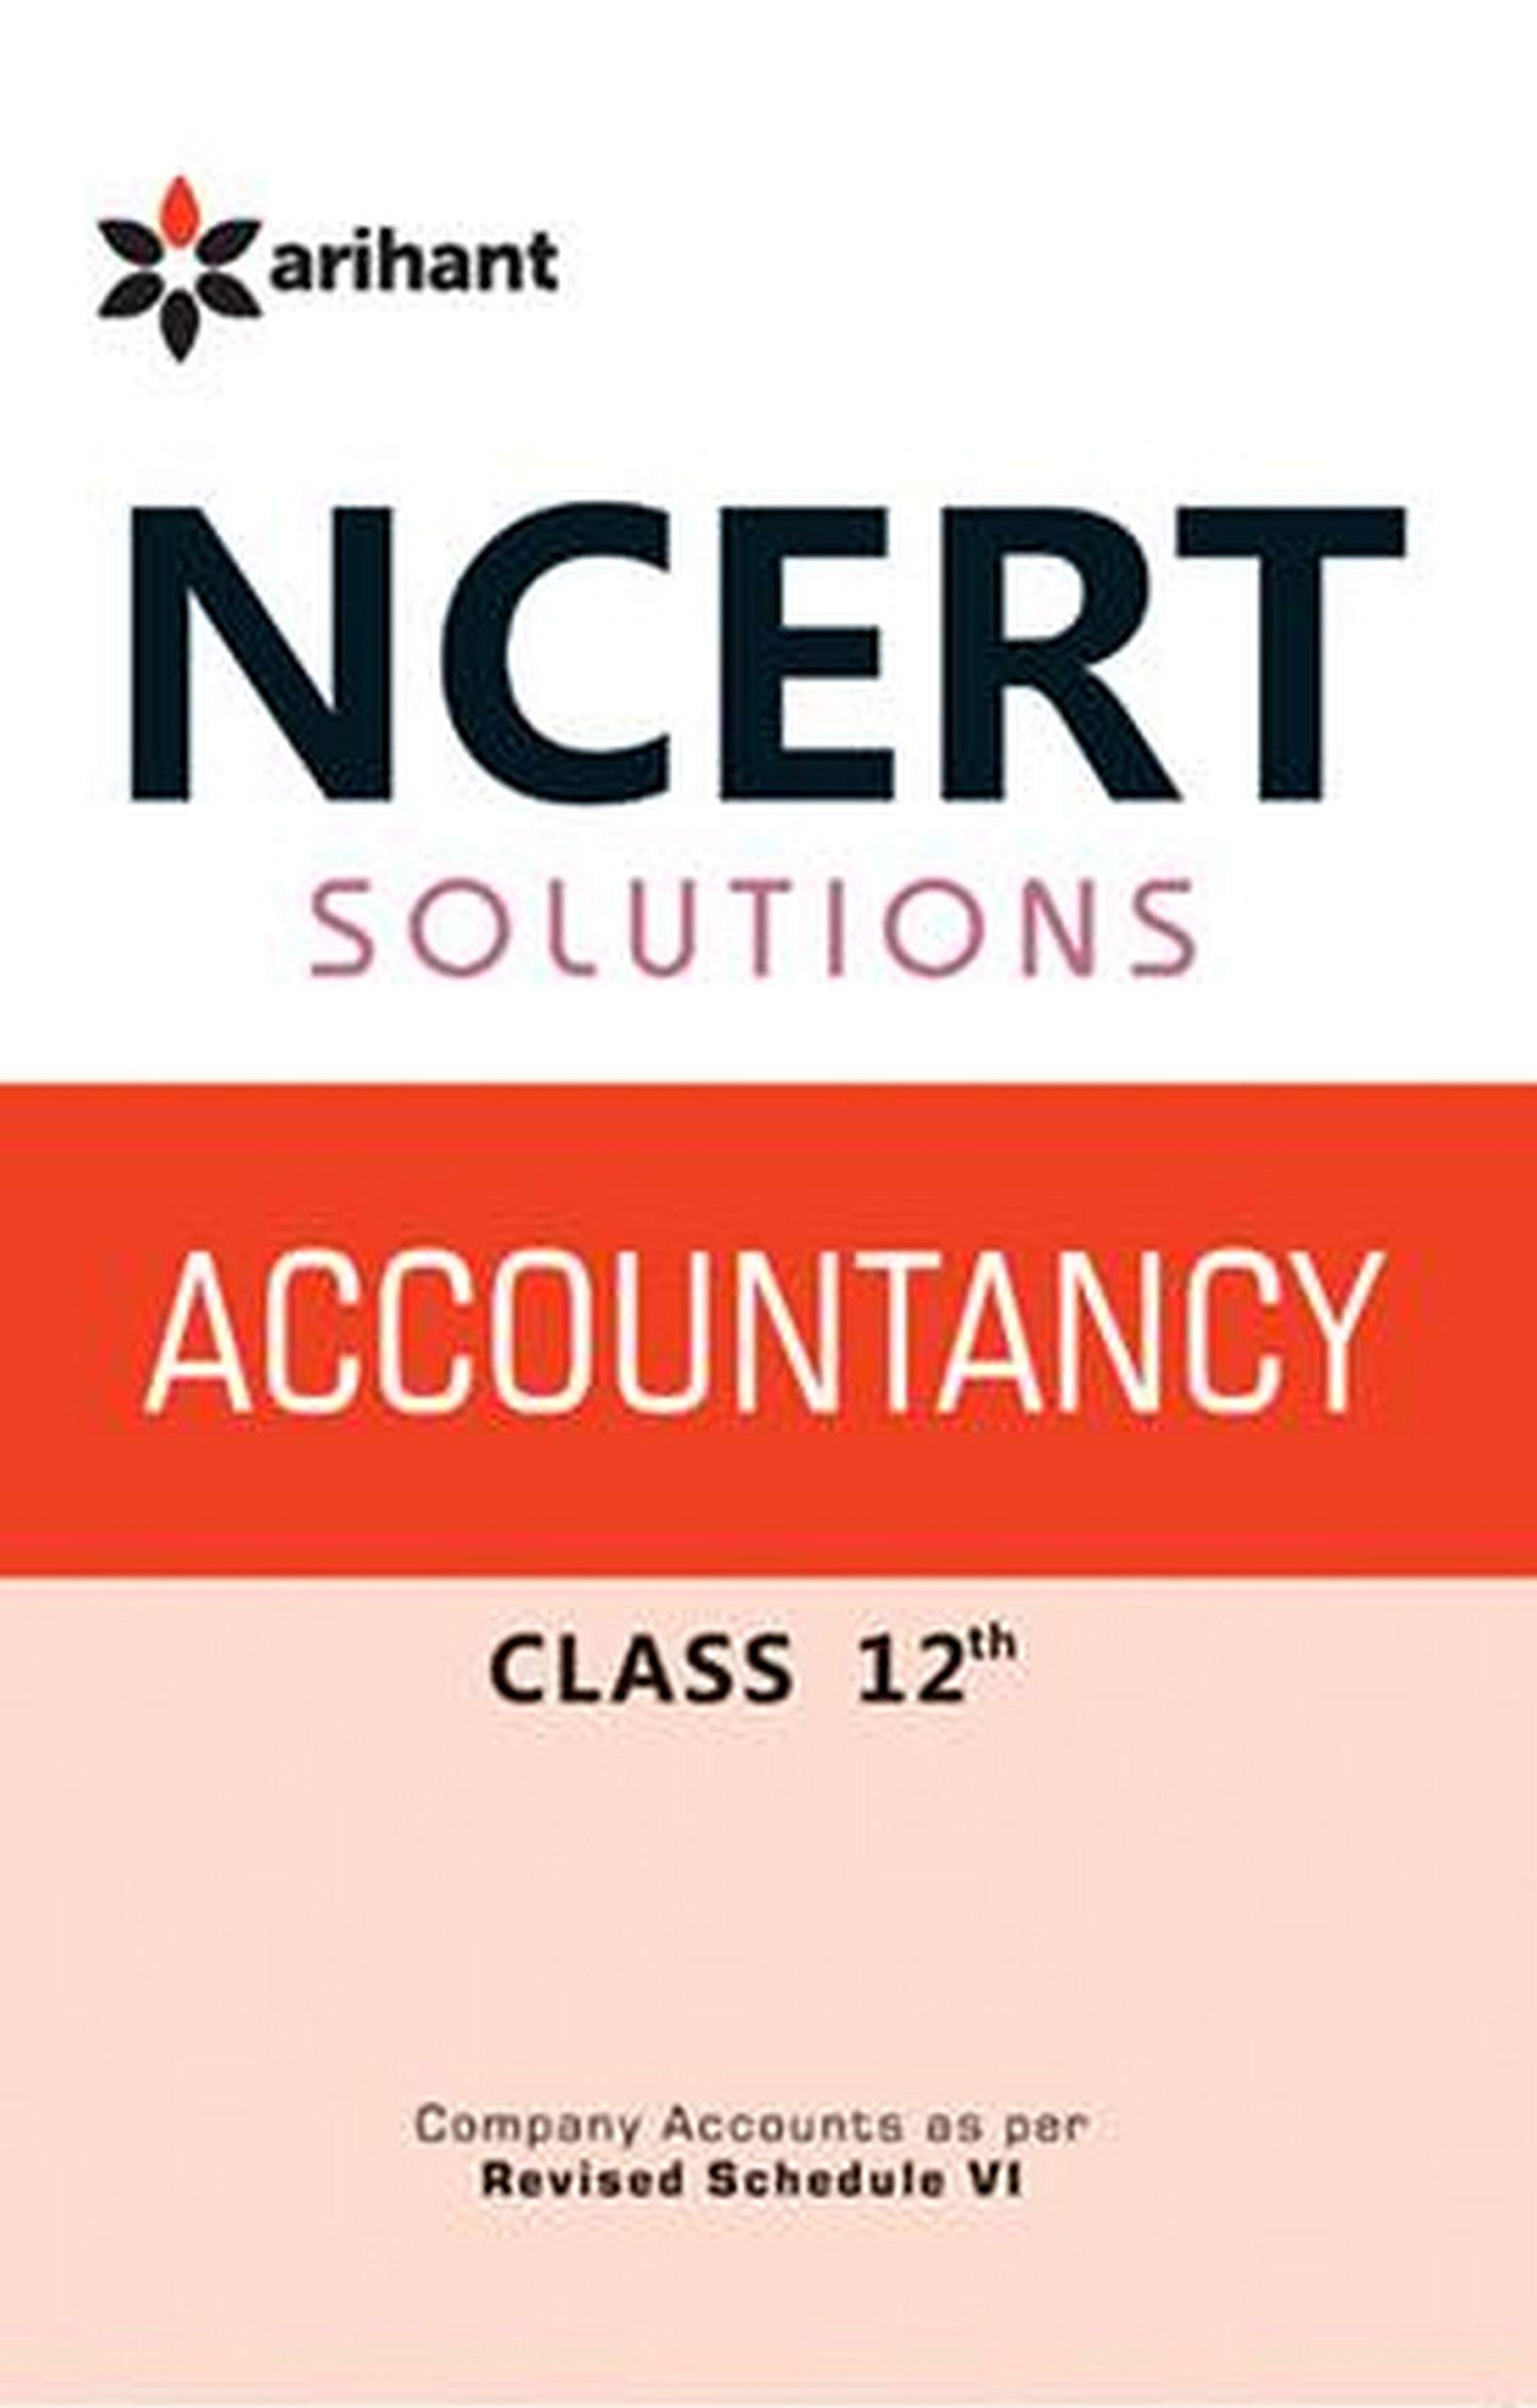 NCERT Solutions - Accountancy for Class 12th